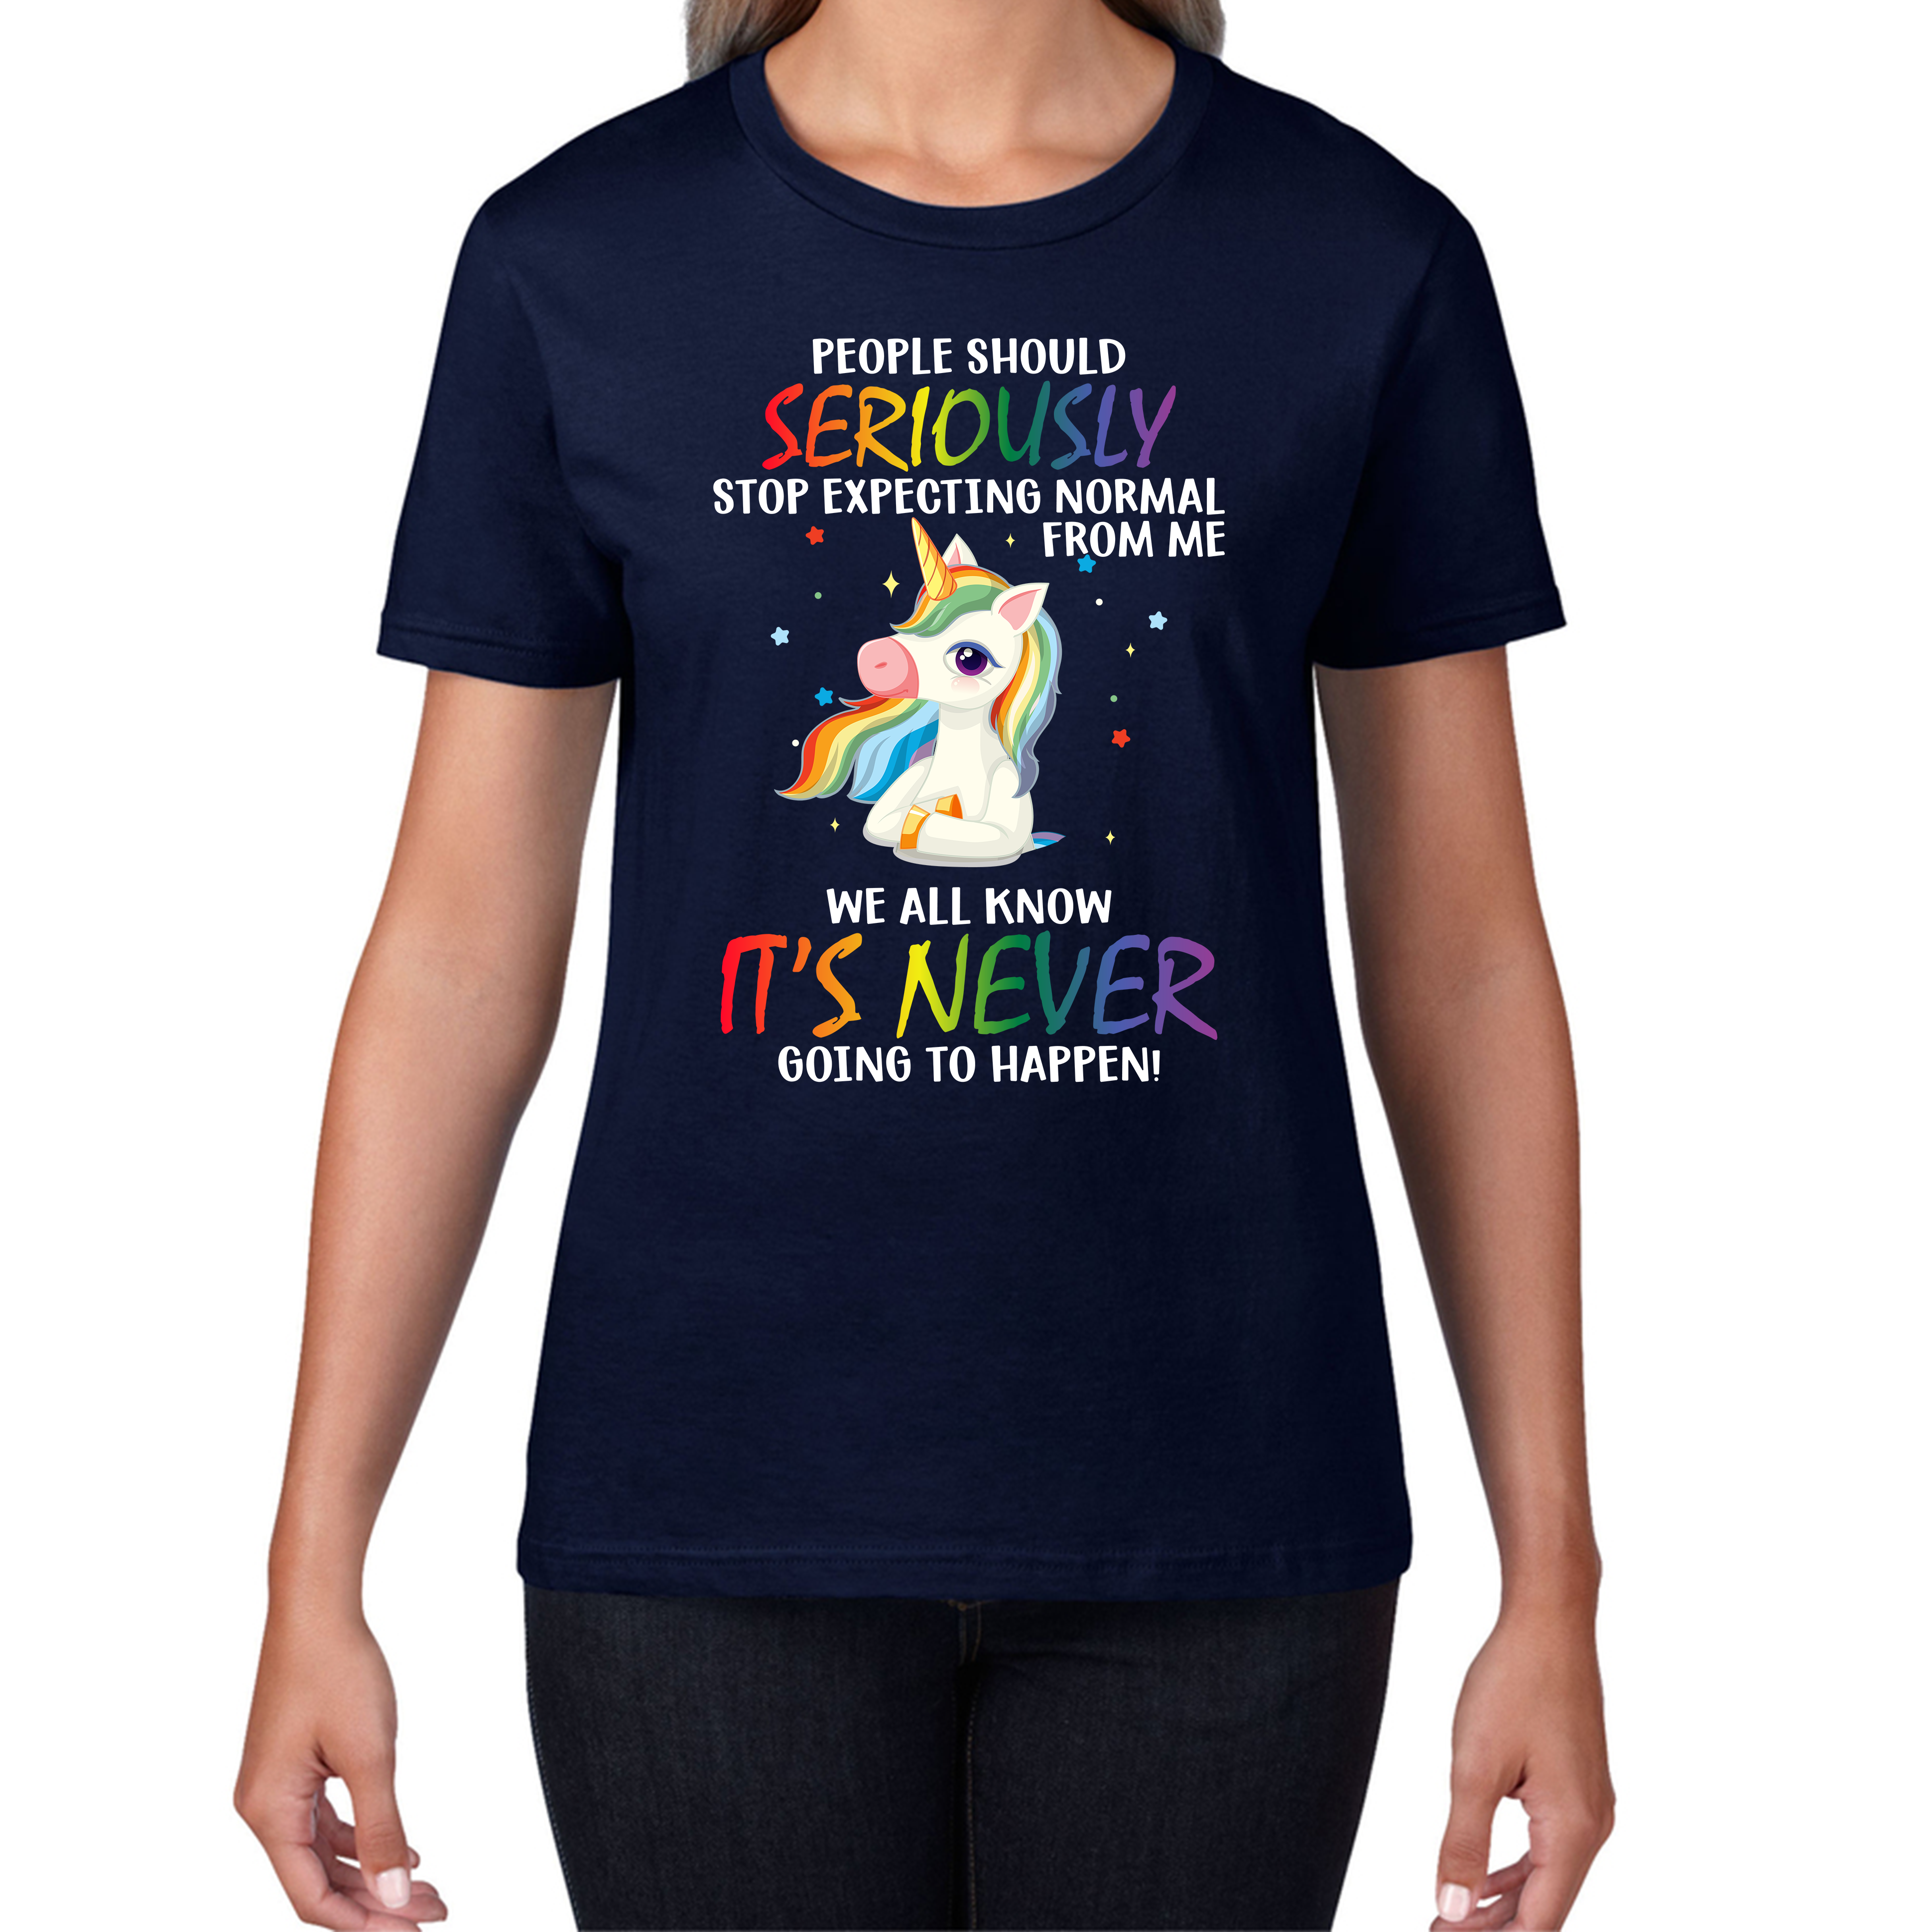 People Should Seriously Stop Expecting Normal From Me Unicorn Horse T-shirt Funny Sarcastic Joke Womens Tee Top